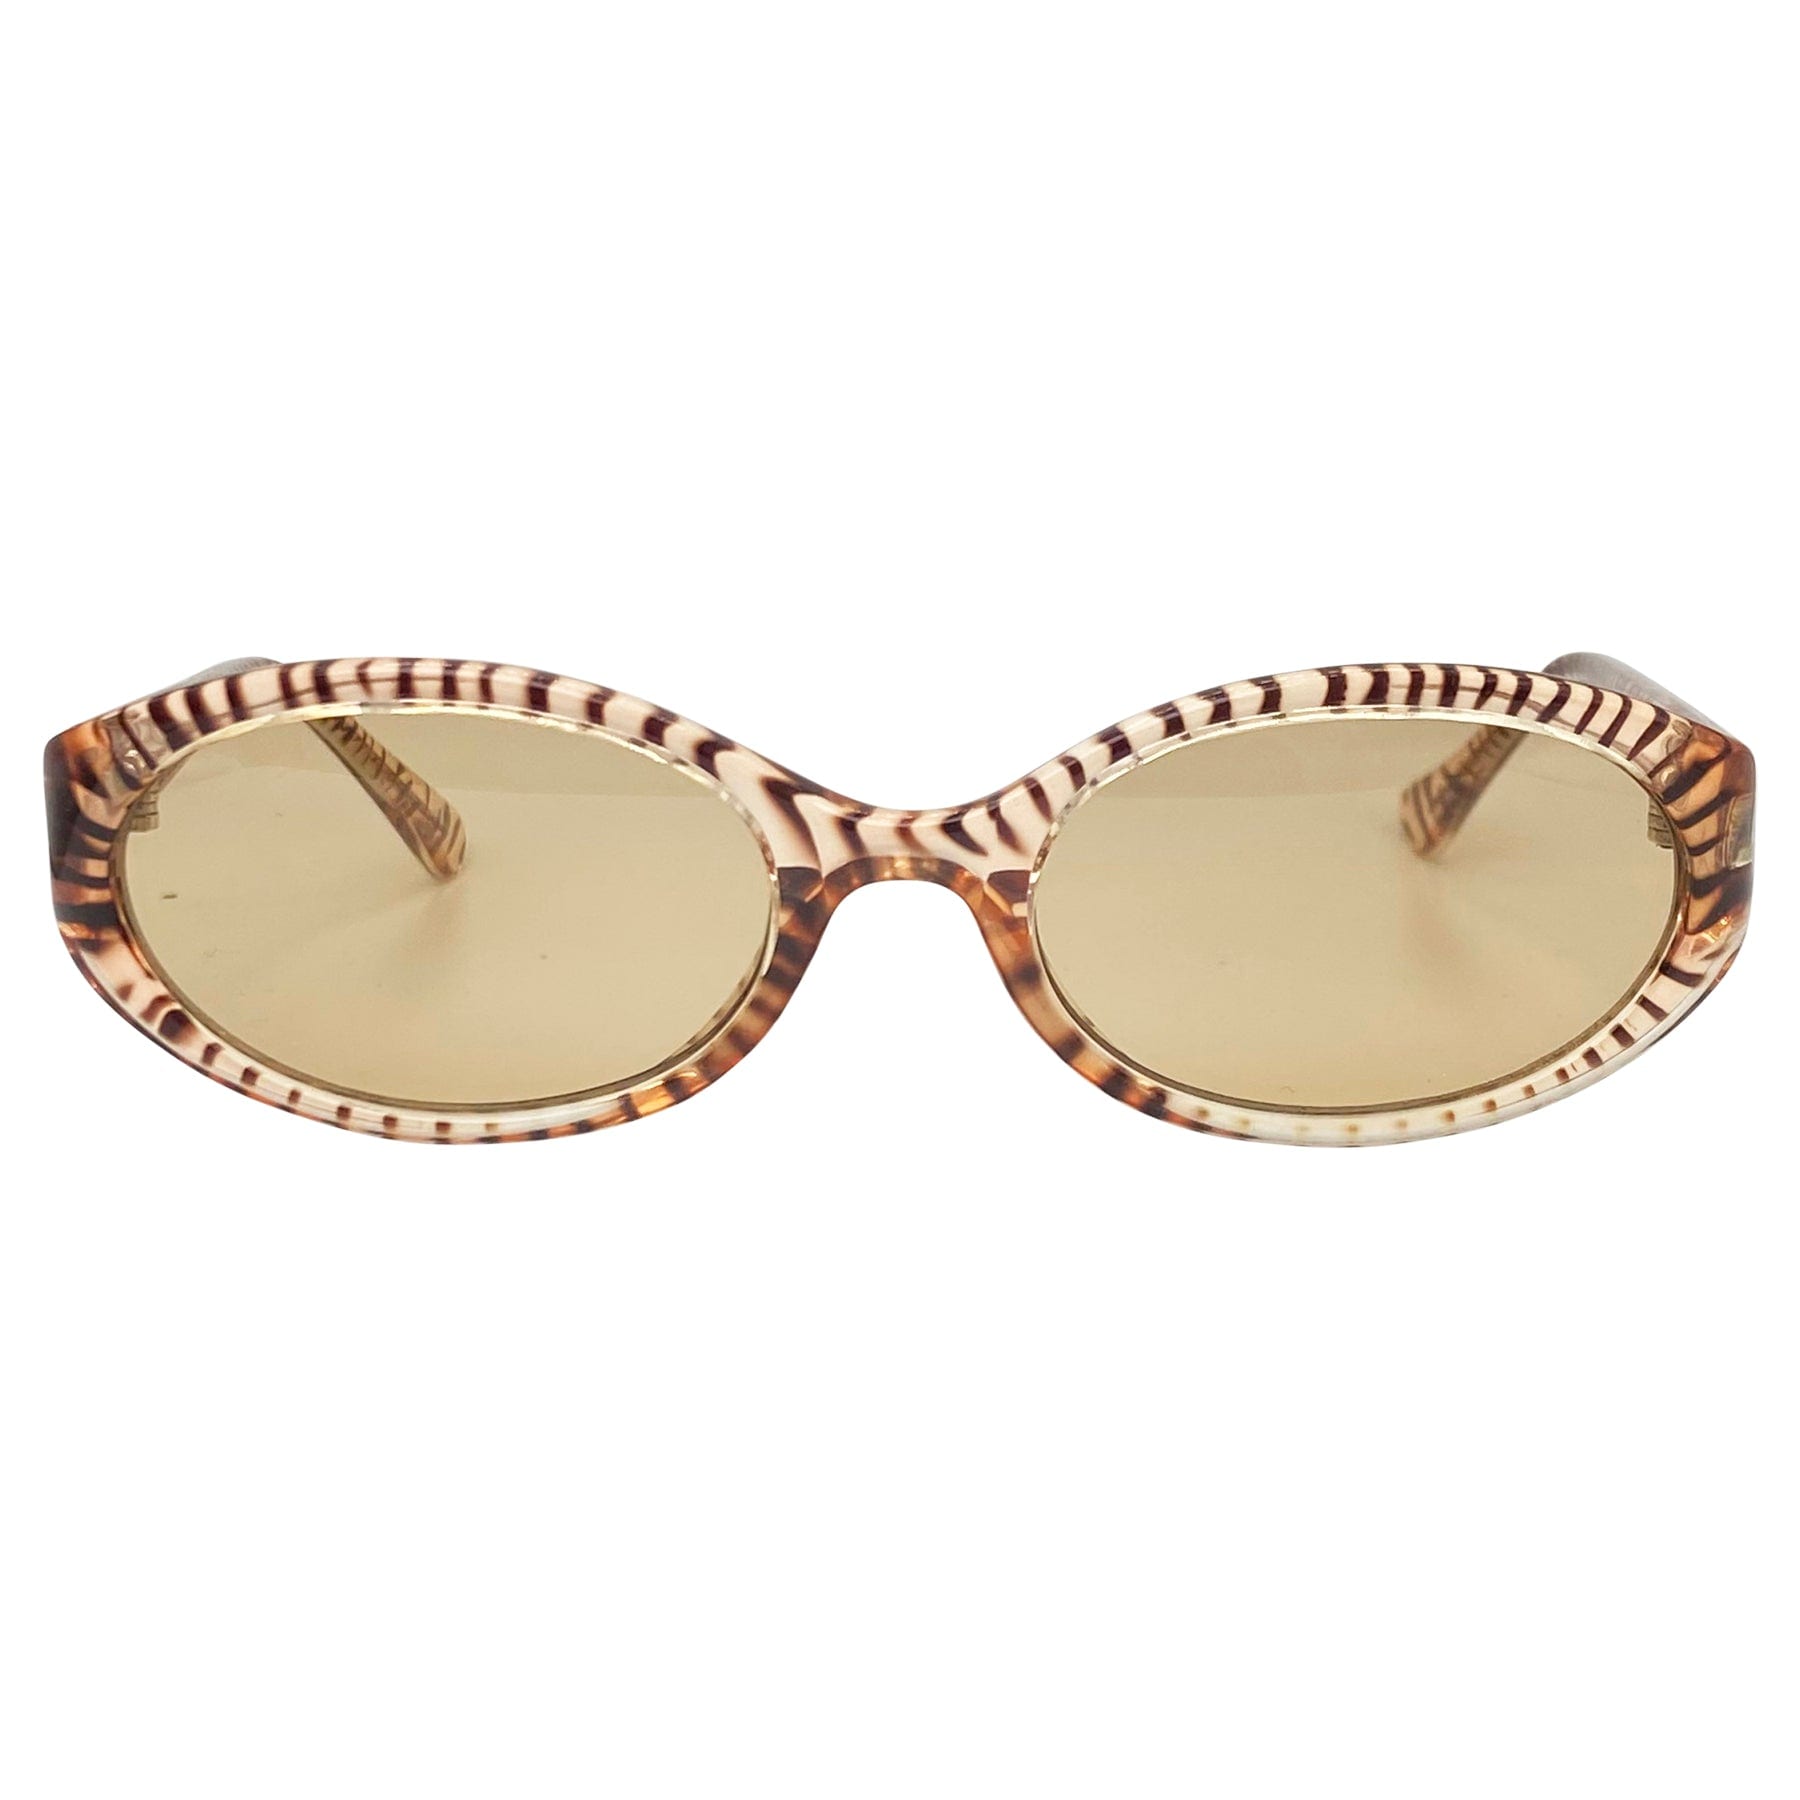 oval round sunglasses shape with a tiger animal print style frame